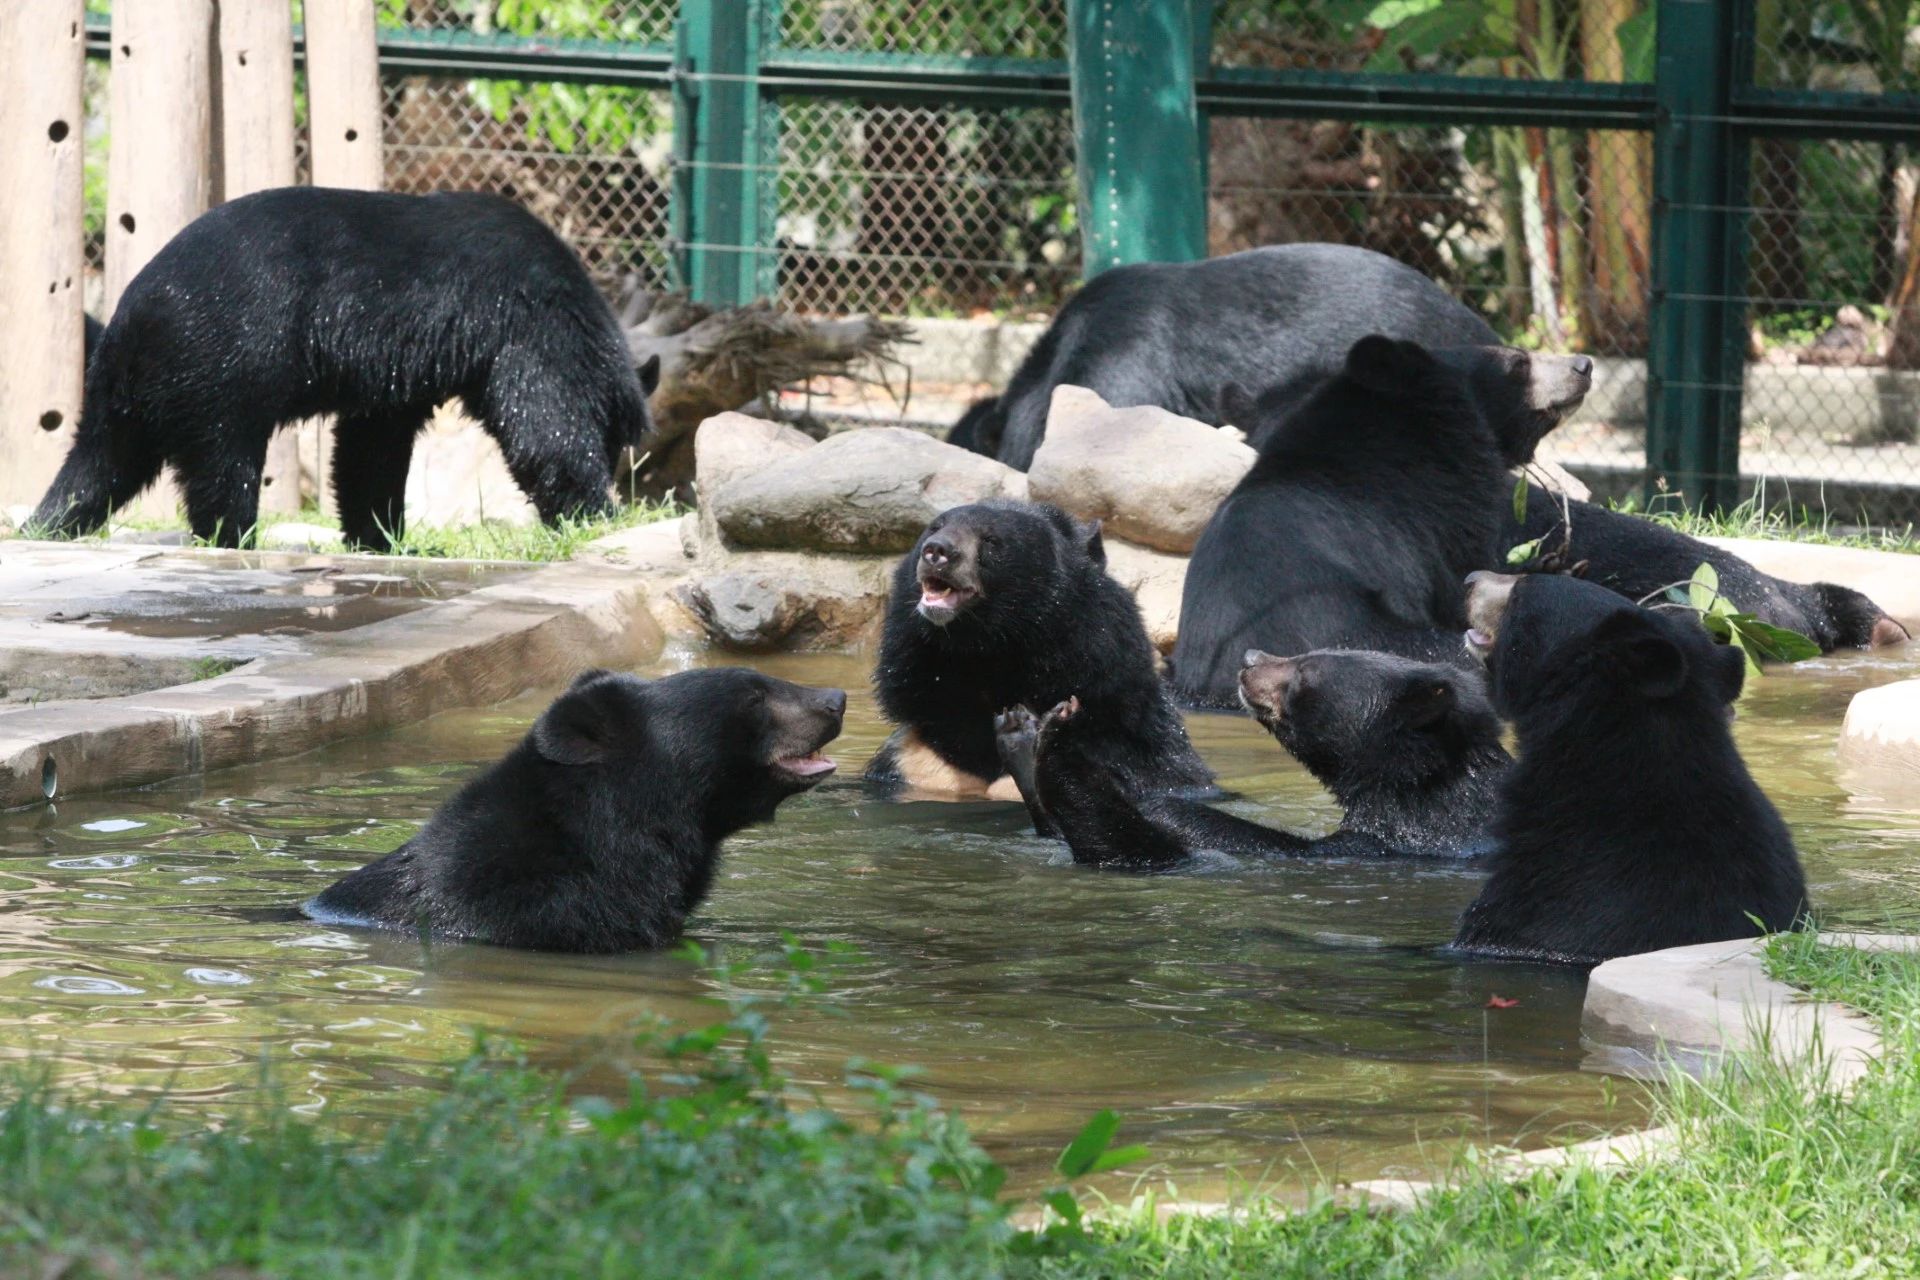 Moon bears playing in a pool